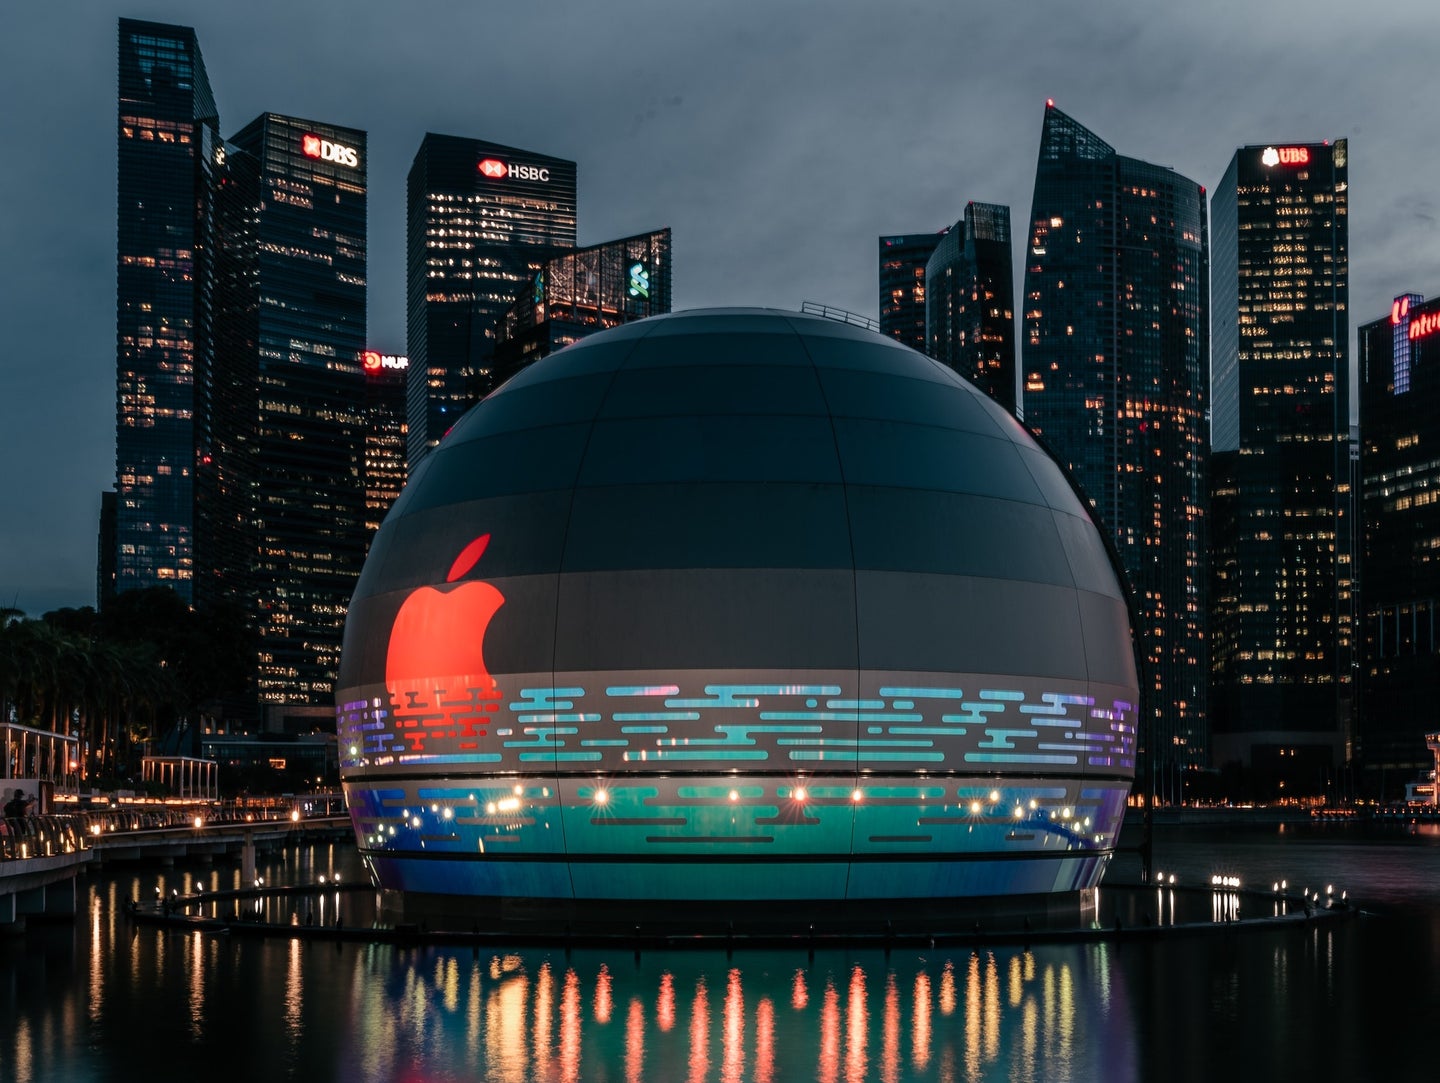 Exterior of spherical Apple store in Singapore in the evening.